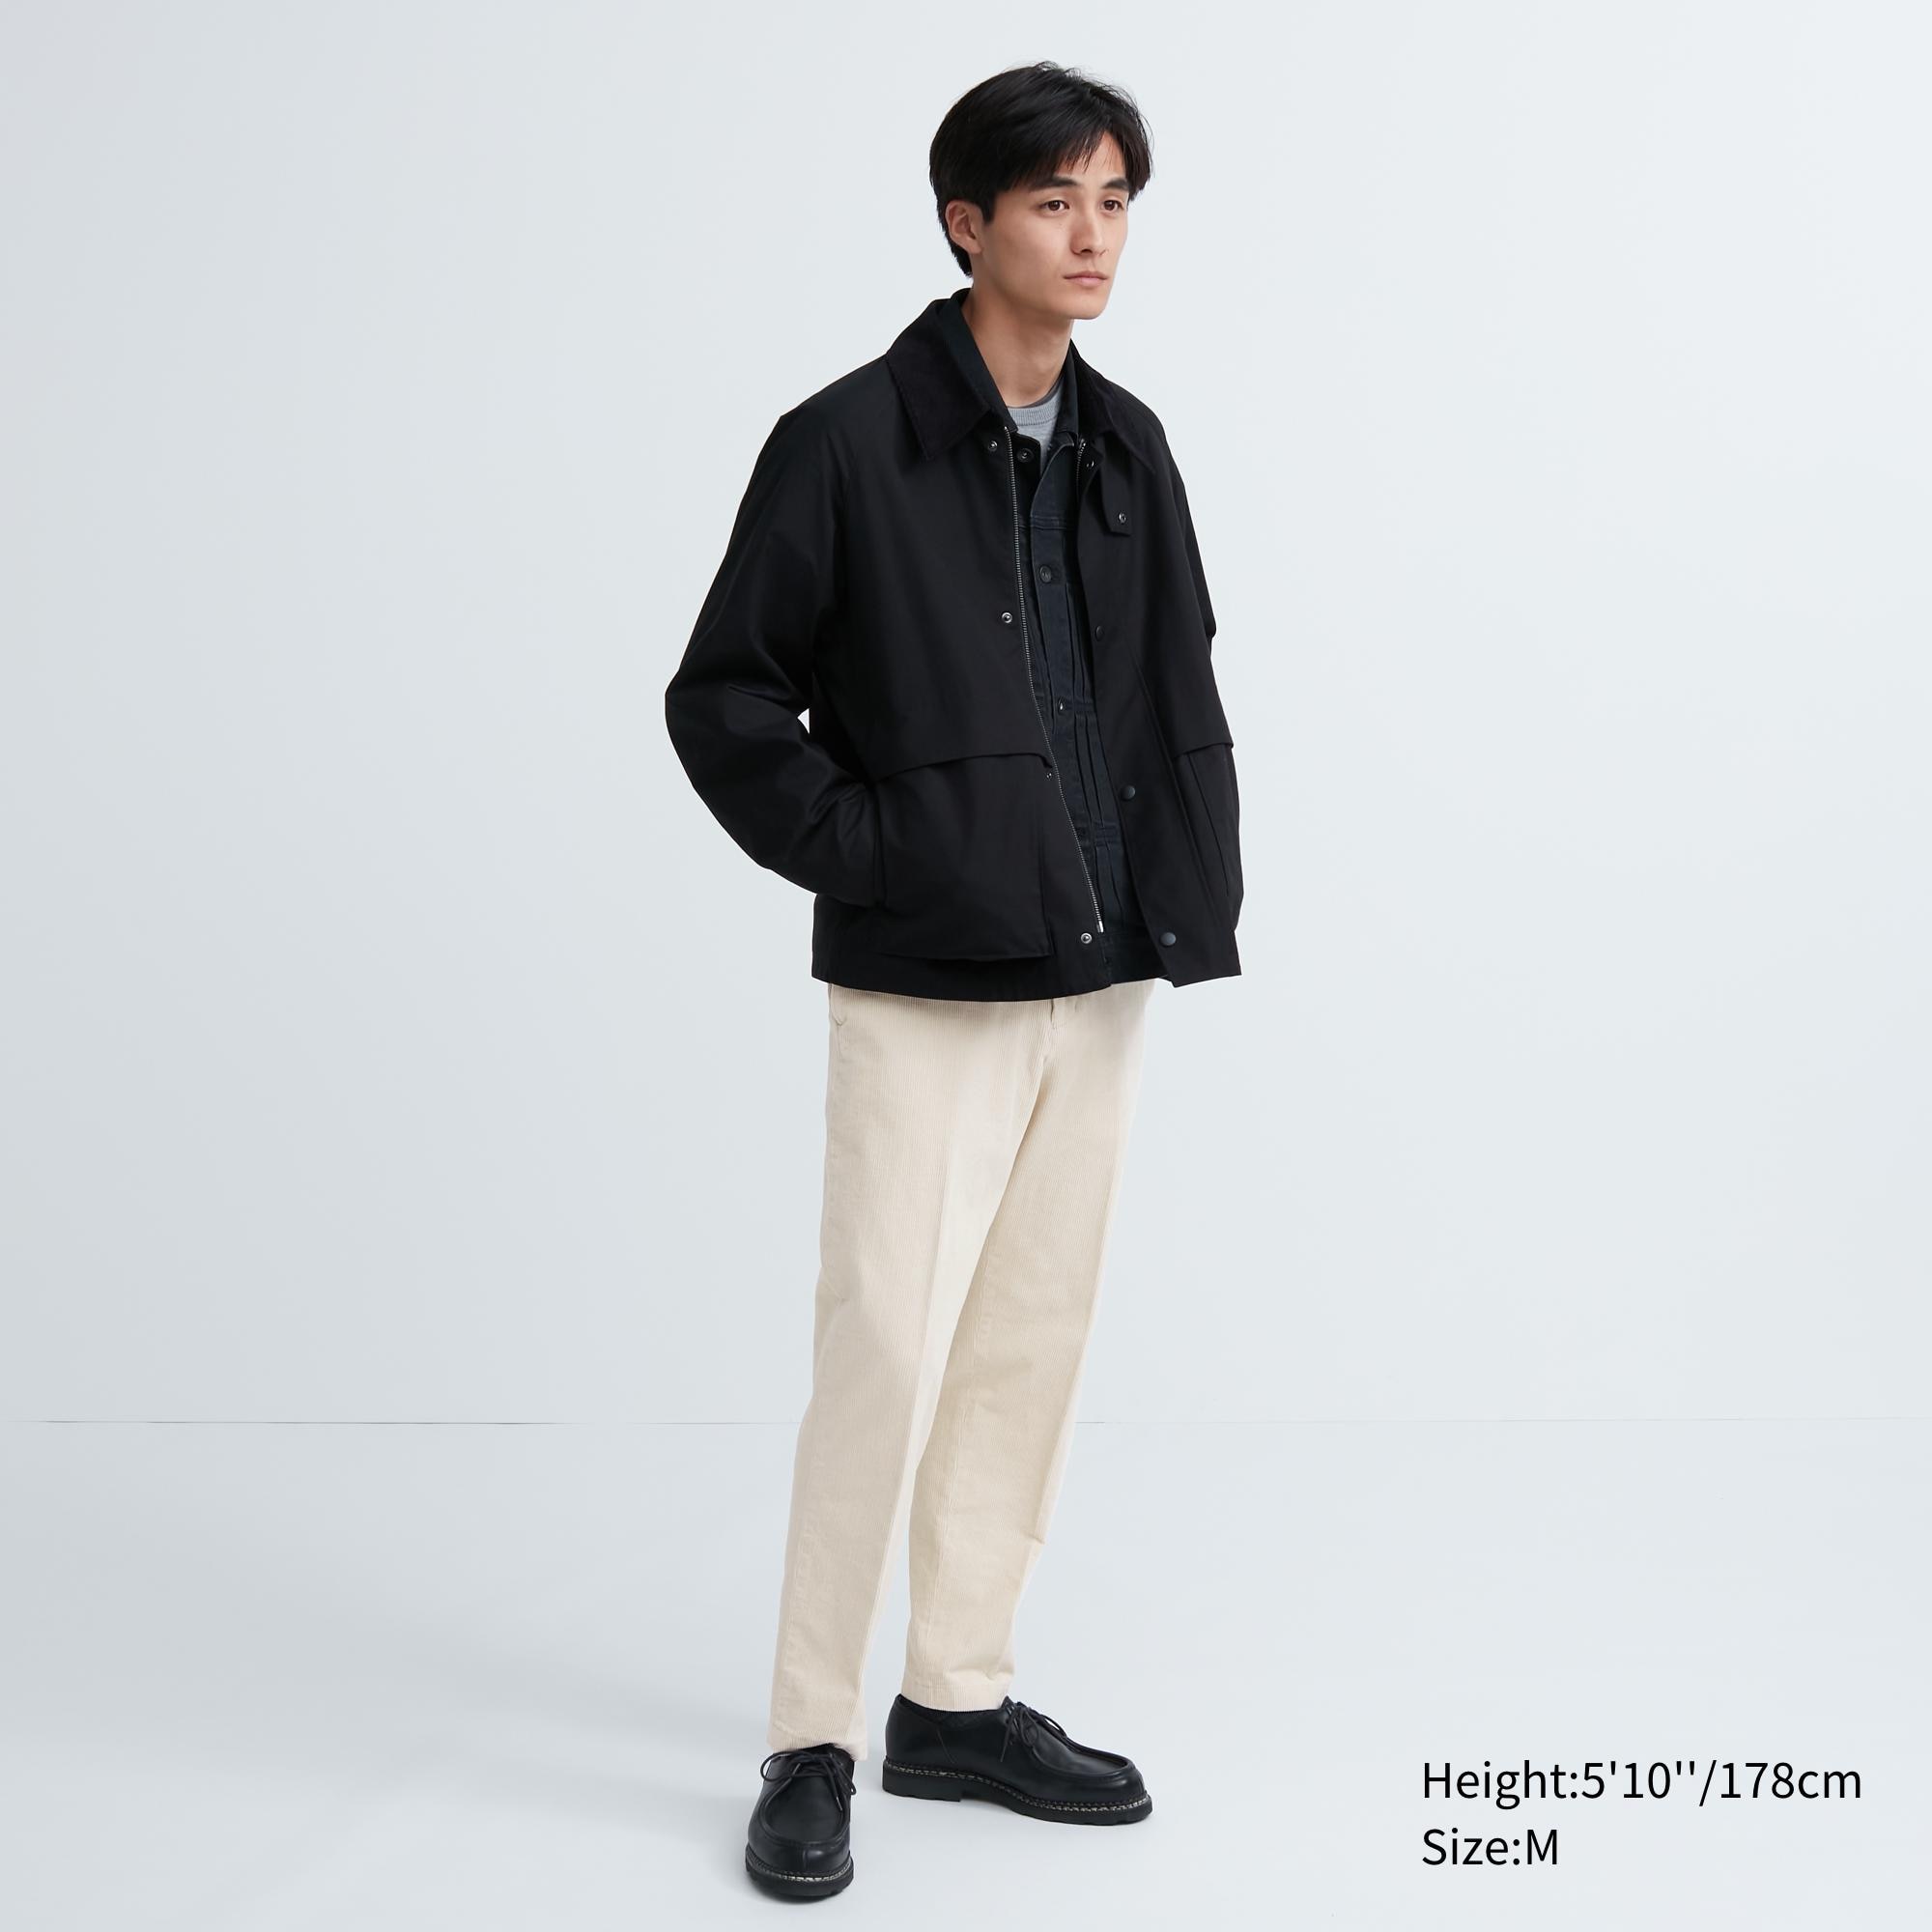 UNIQLO HUNTING JACKET Mens Fashion Coats Jackets and Outerwear on  Carousell